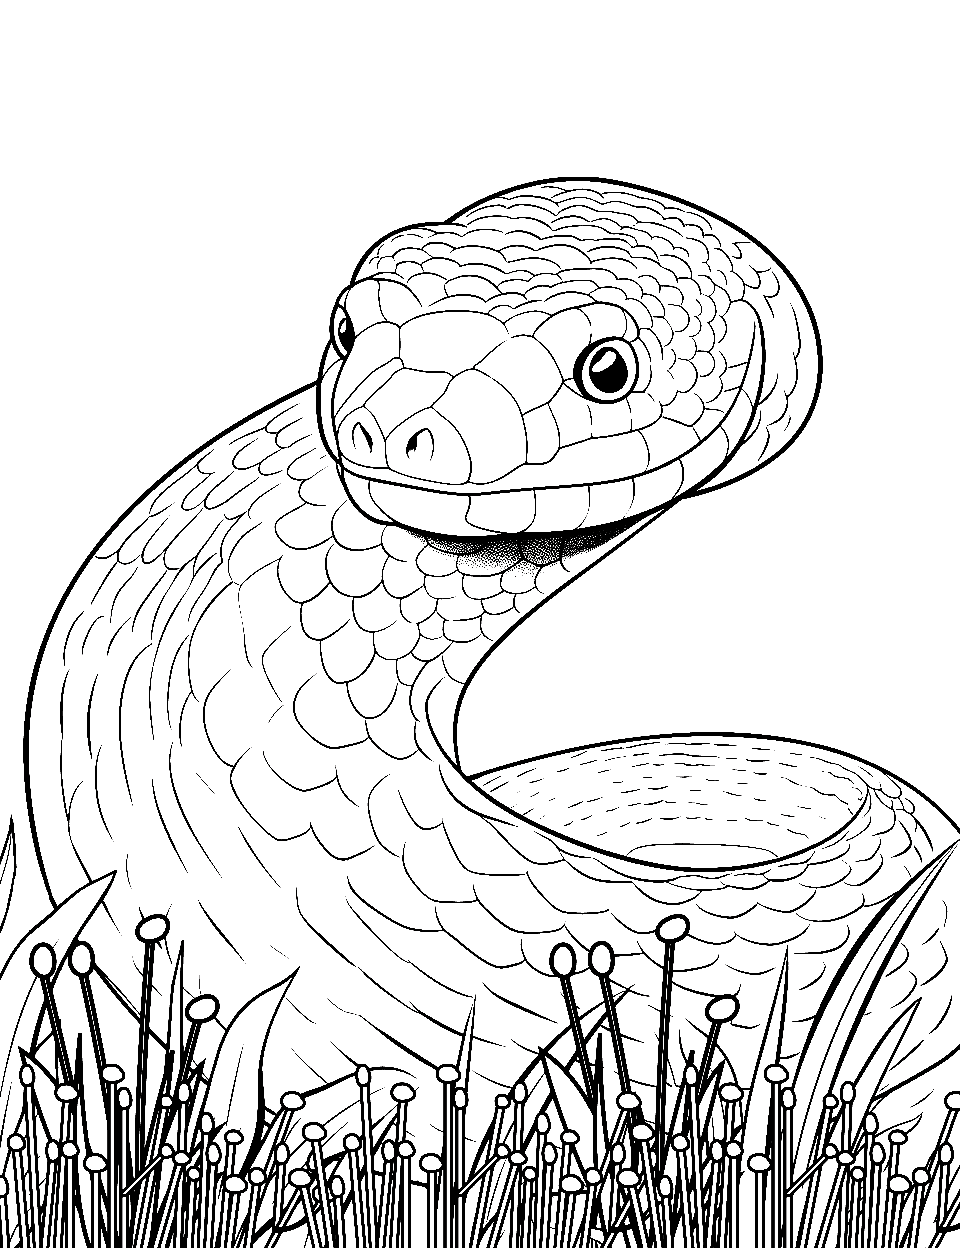 Green Mamba's Territory Coloring Page - A sleek green mamba moving swiftly through the grass.